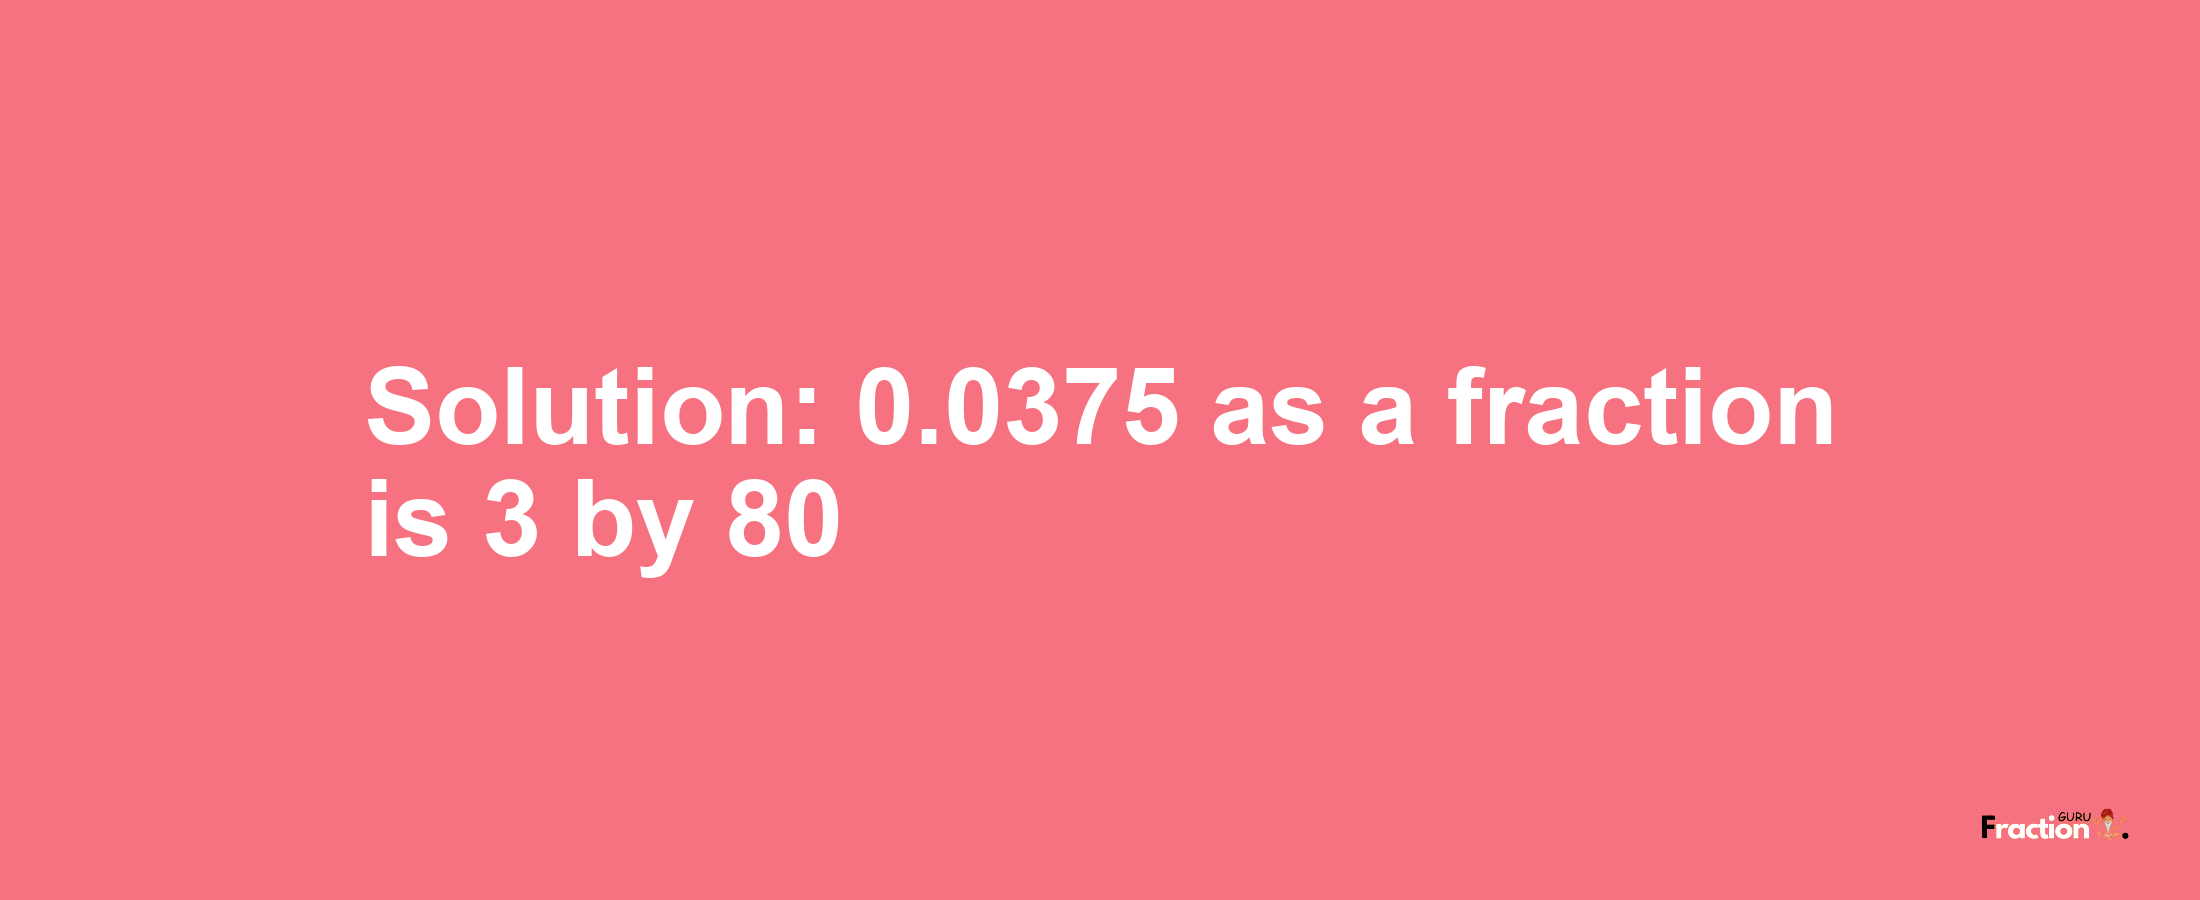 Solution:0.0375 as a fraction is 3/80